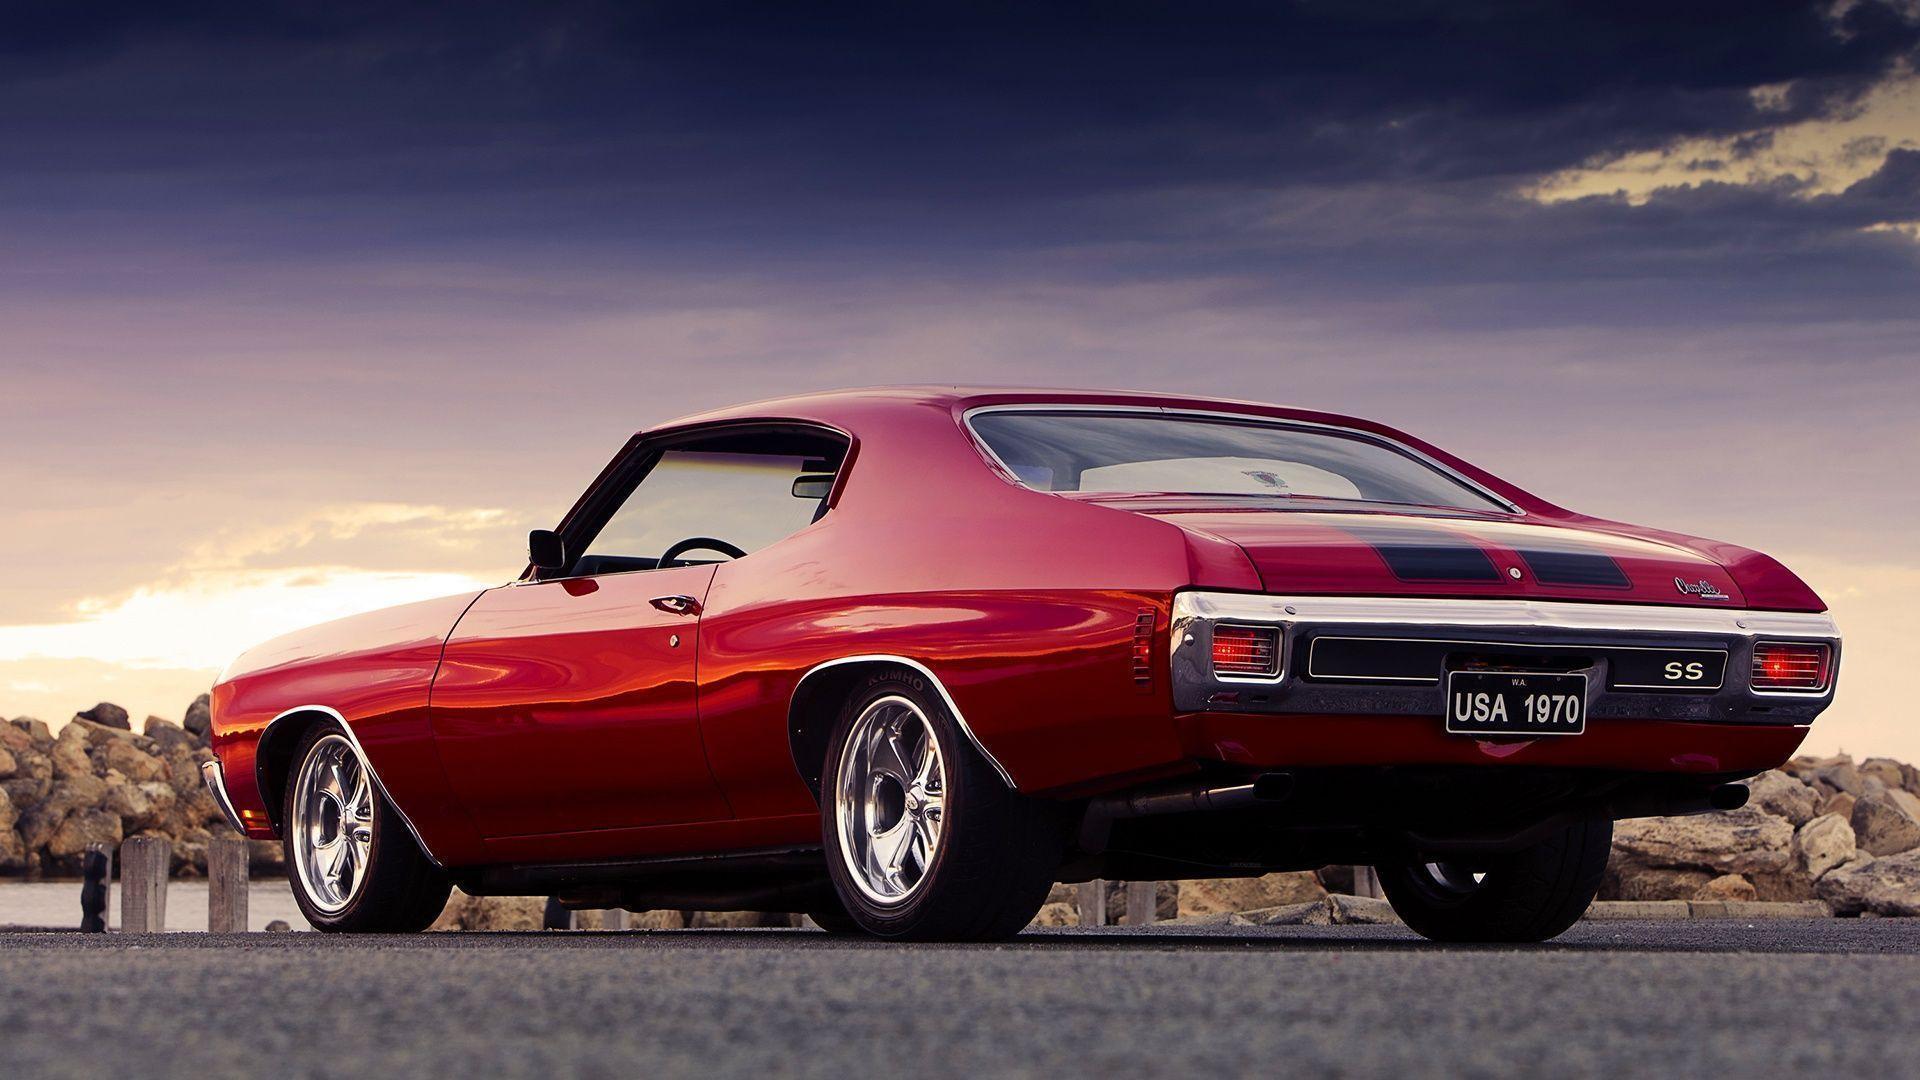 Chevy Chevelle Ss Wallpaper Image & Picture